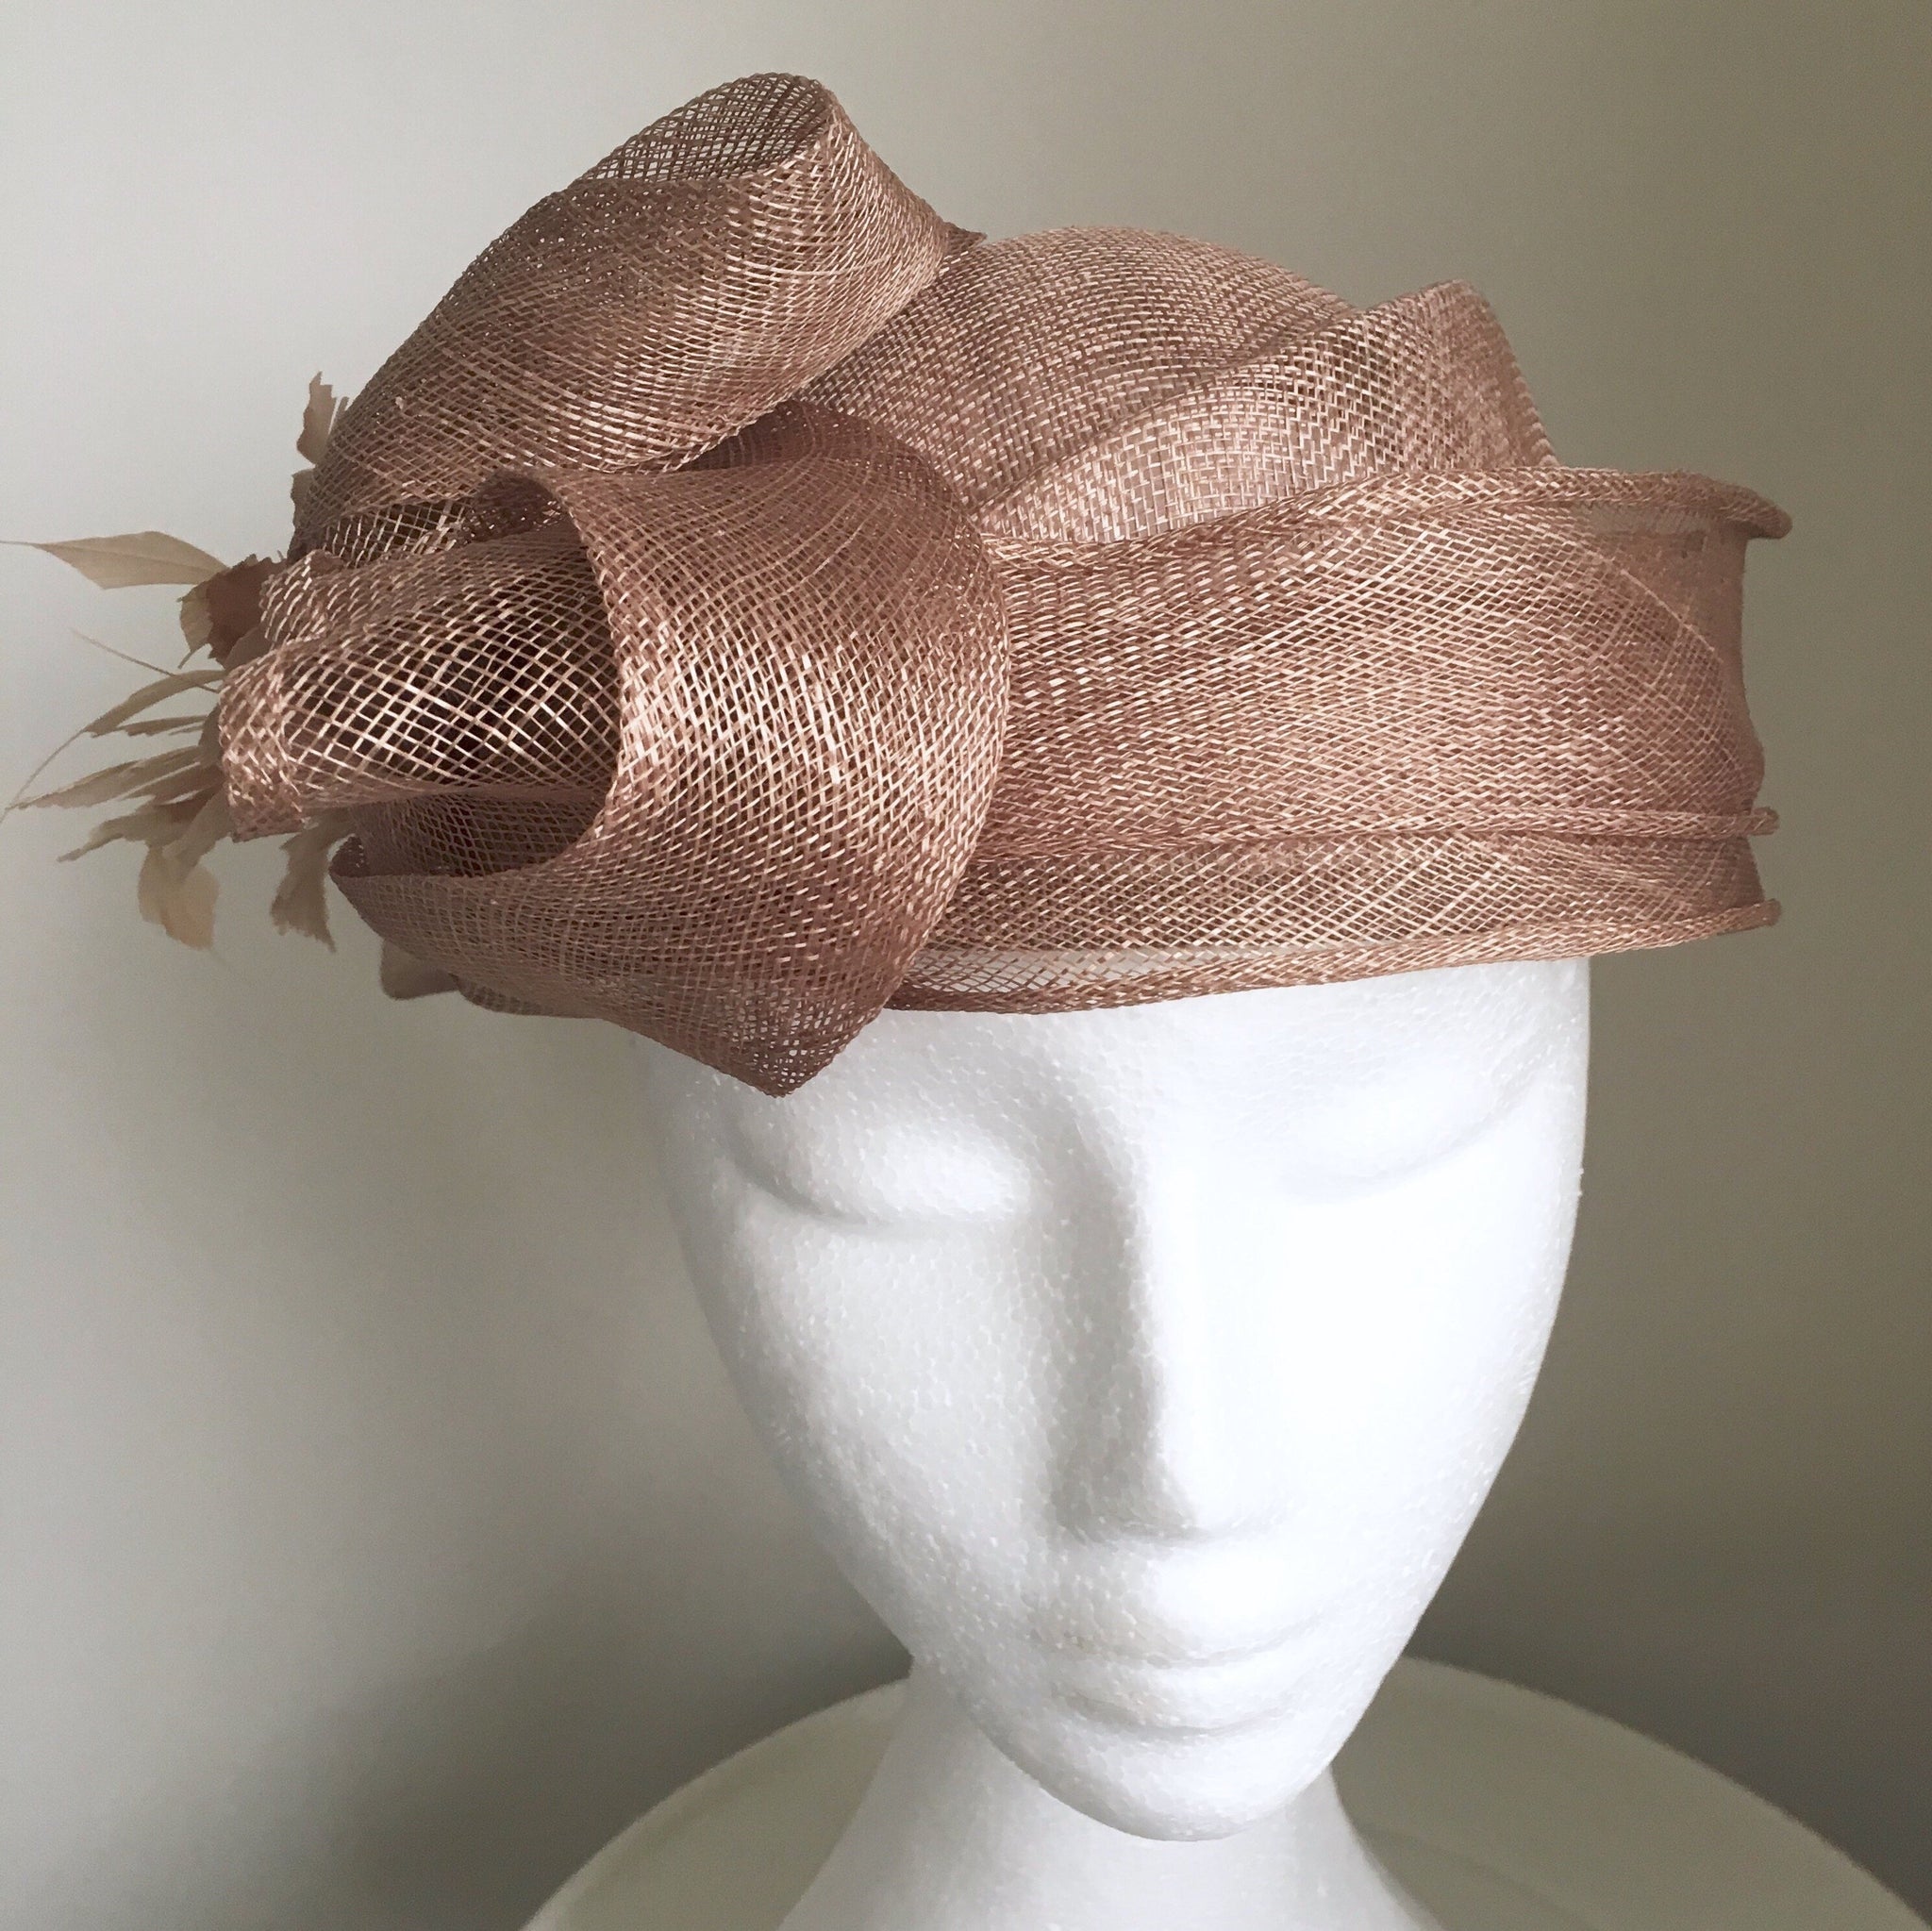 Anouk Taupe Fascinator Hat, Kentucky Derby Hat, KY Oaks Fascinator, Spring Racing Fashion 2023, Royal Wedding Hat, Tea-Party Millinery